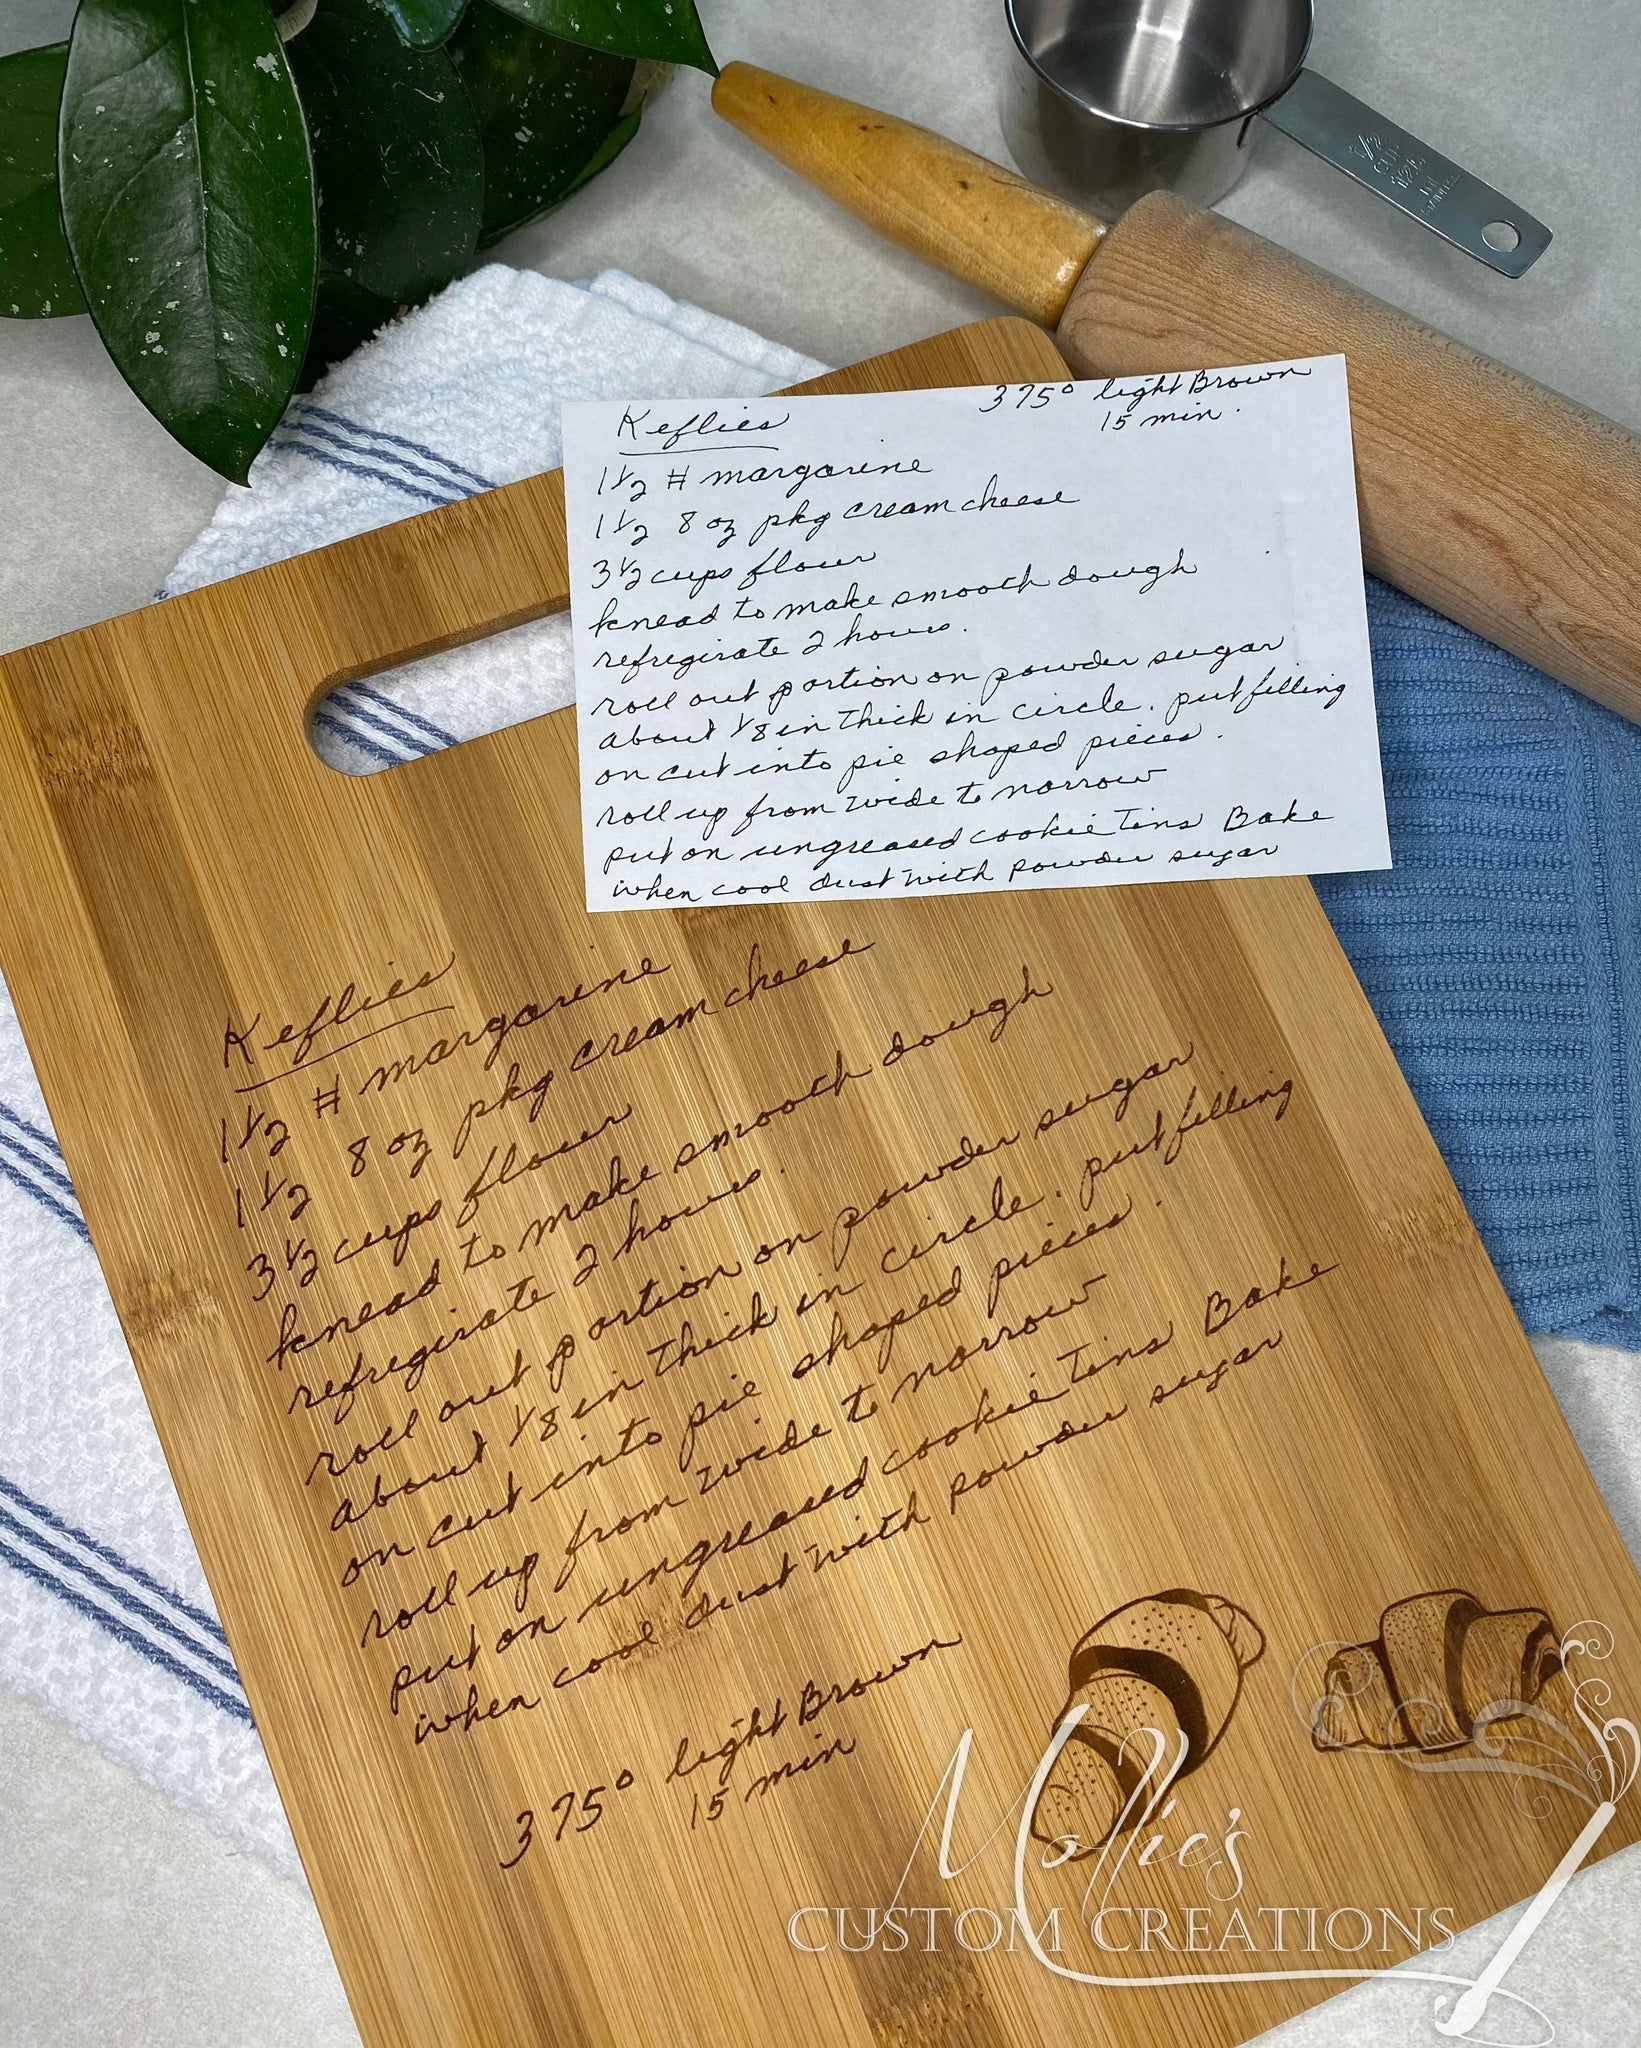 Recipe Cutting Board Handwritten, Gift for Sister, Mother, Grandmother,  Friend, Personalize Gift Under 50, Family Gift, Memorial 